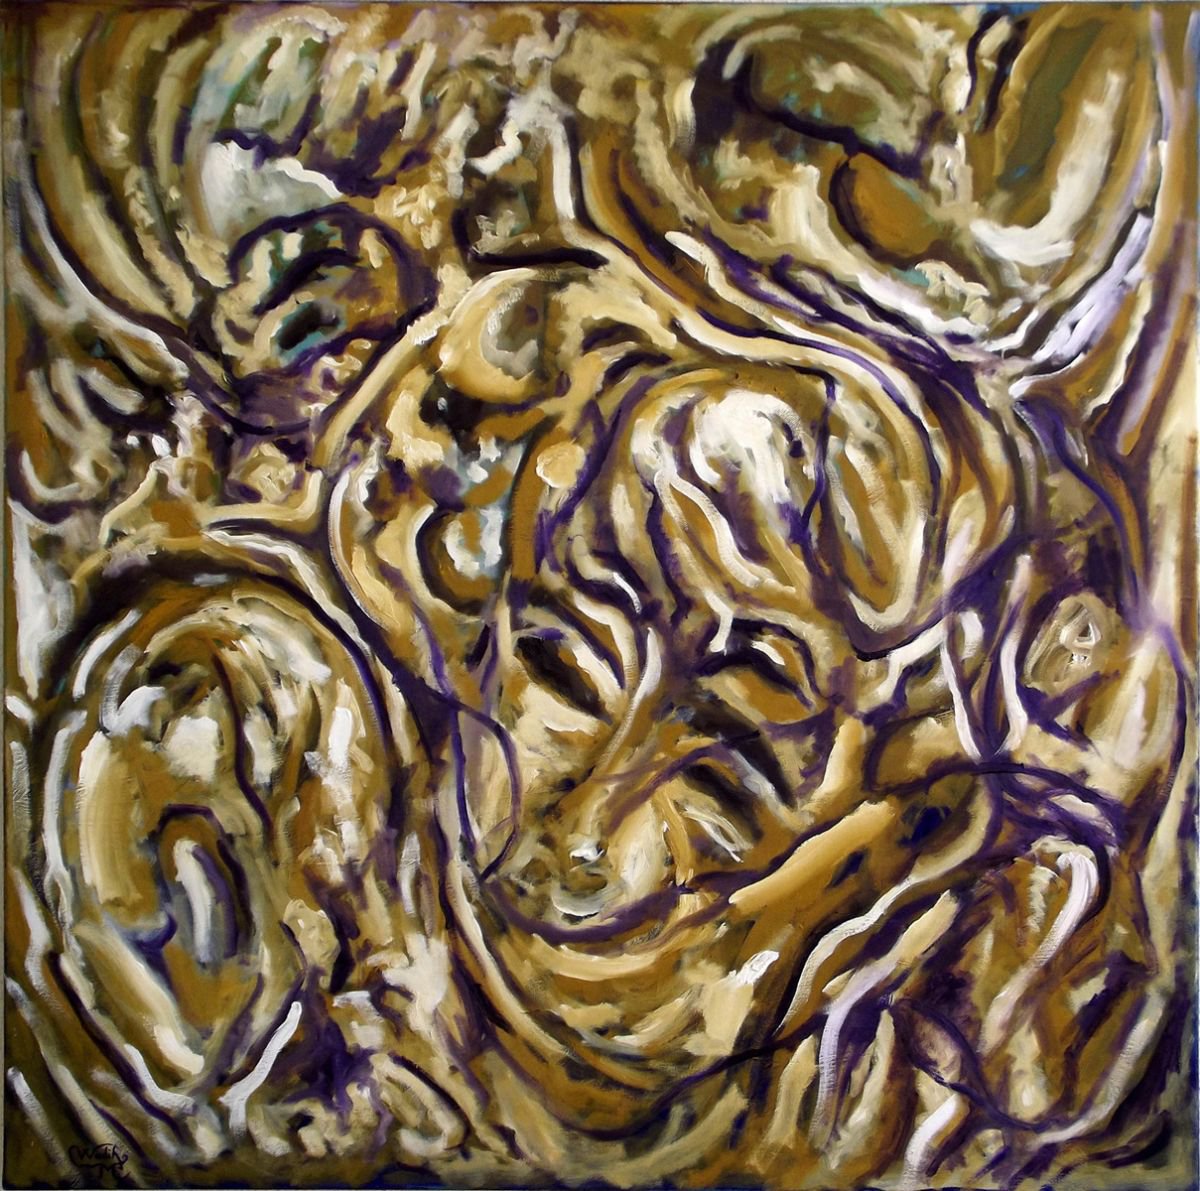 THE CHAOS - Illusionistic figures - Face combination - Big size Oil on canvas (100100cm) by Wadih Maalouf